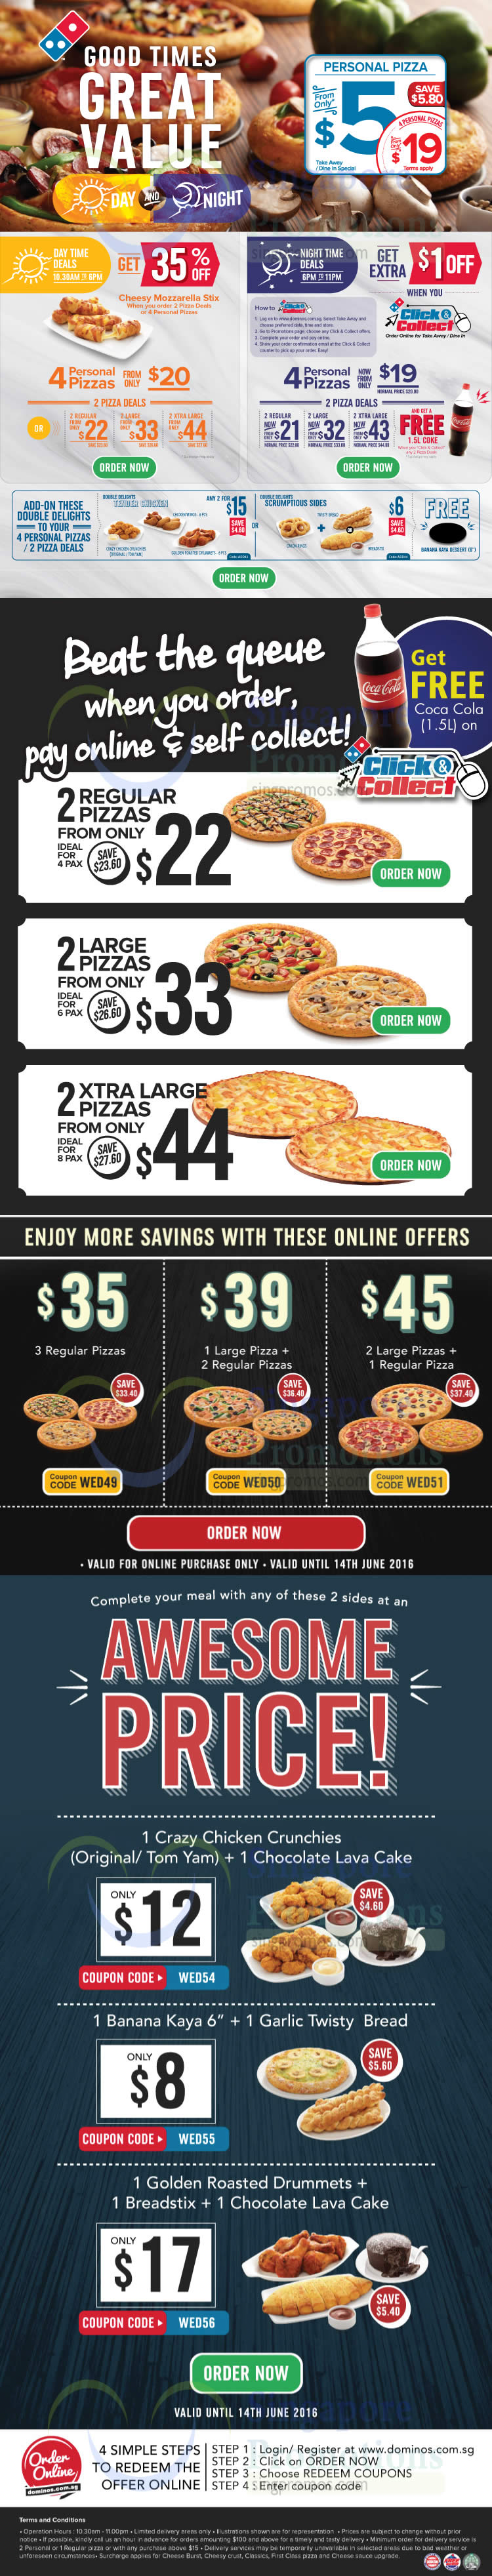 dominos coupon carryout